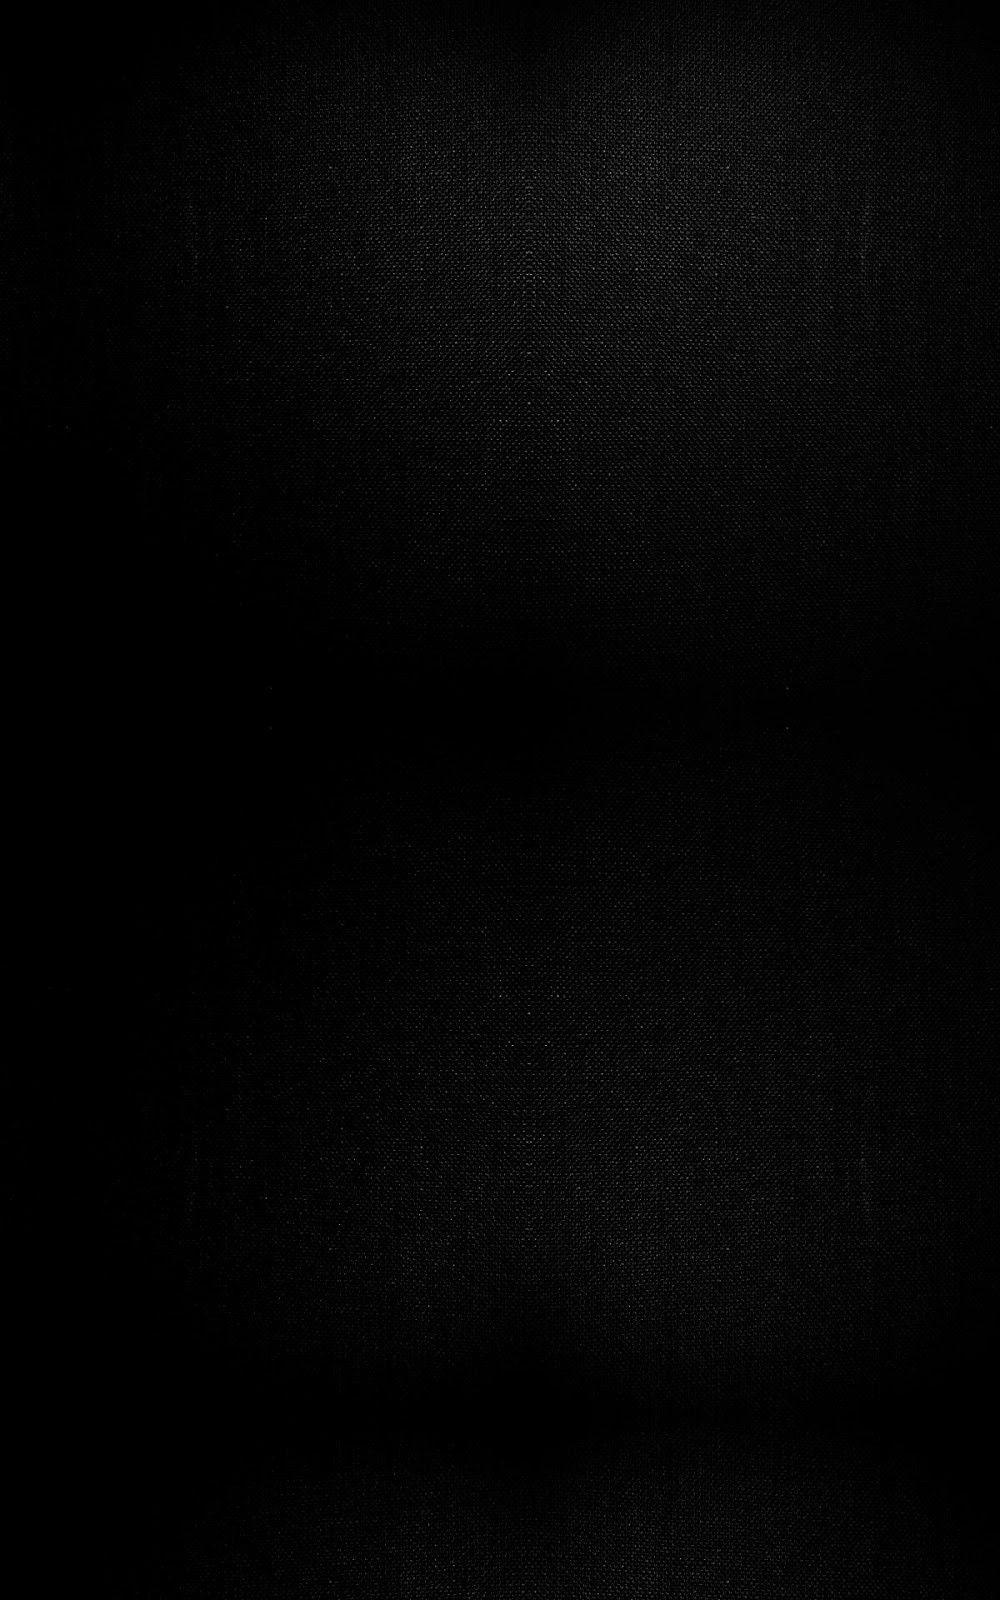 Solid Black Iphone Wallpapers Top Free Solid Black Iphone Backgrounds